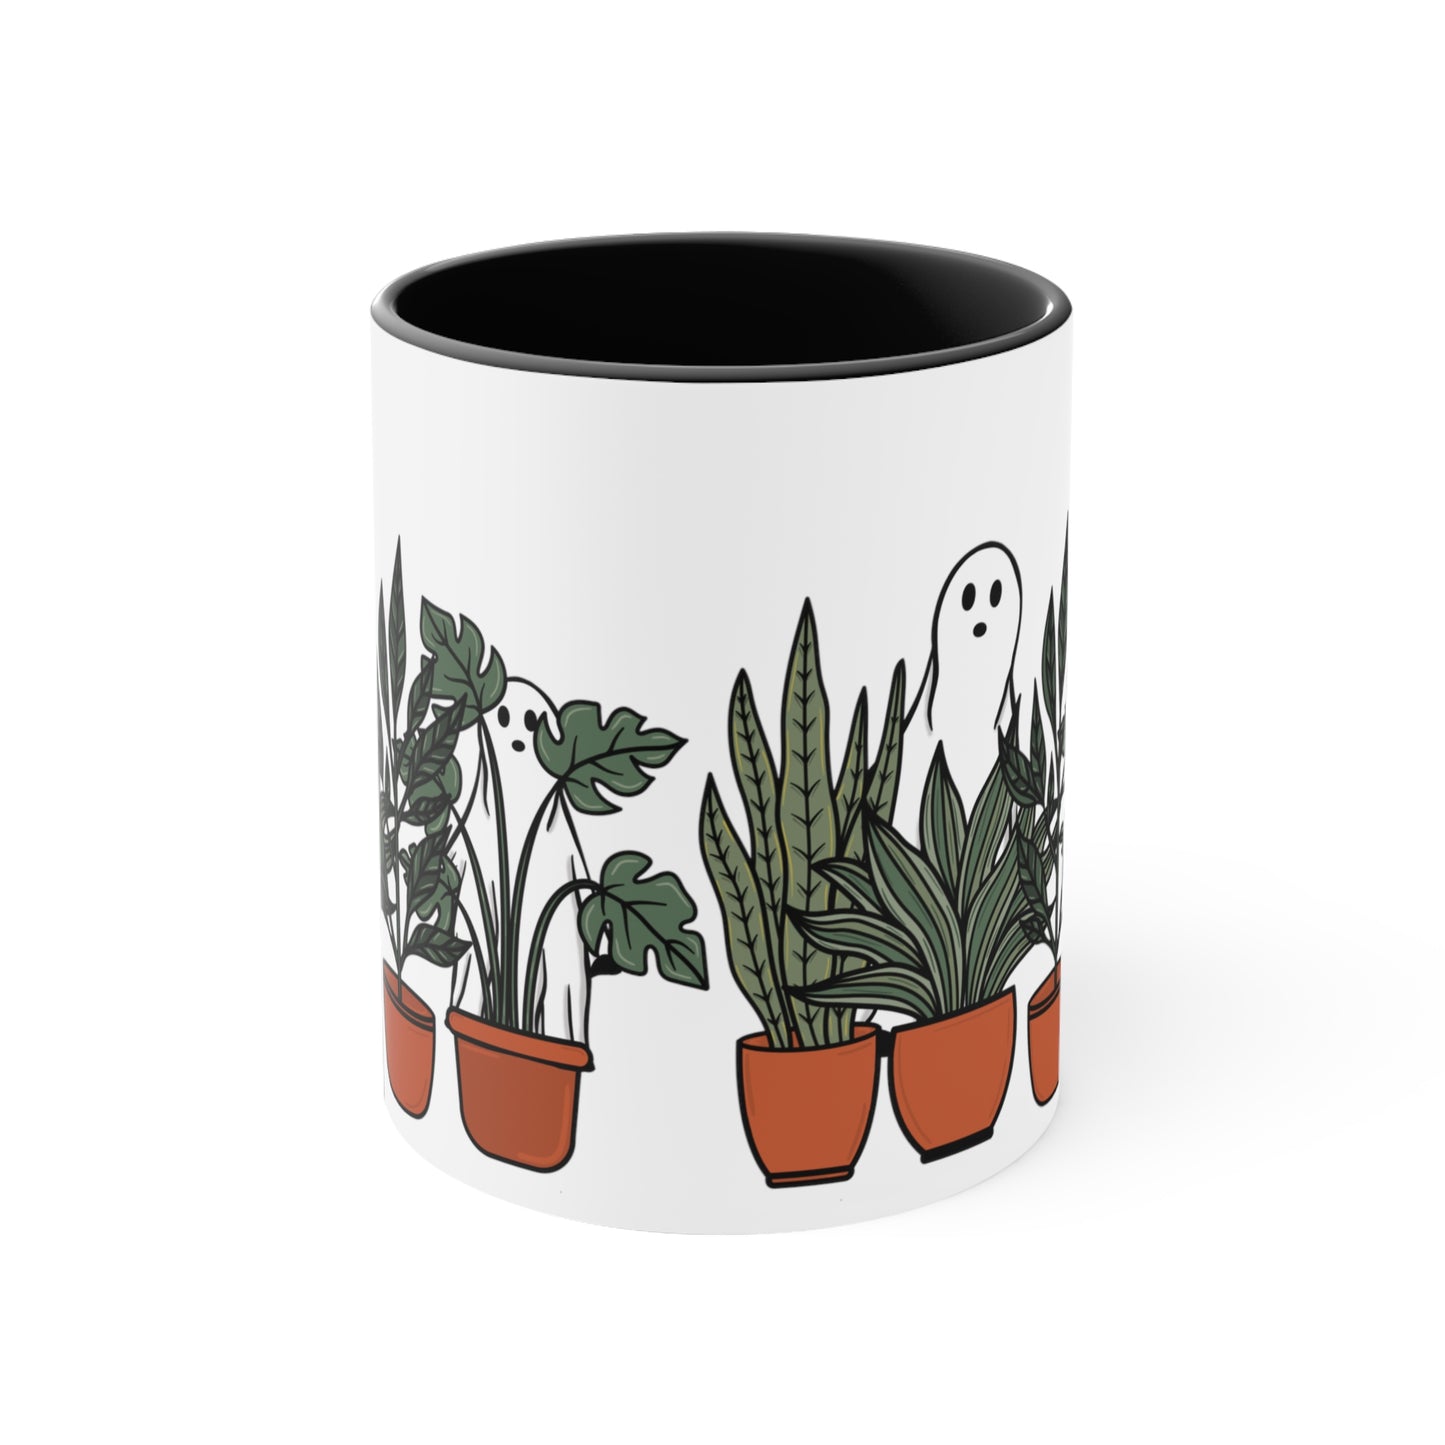 Potted plants and ghosts ceramic Coffee Mug, 11oz for him or her. Cute Halloween coffee mug with house plants for plant lady or plant daddy.